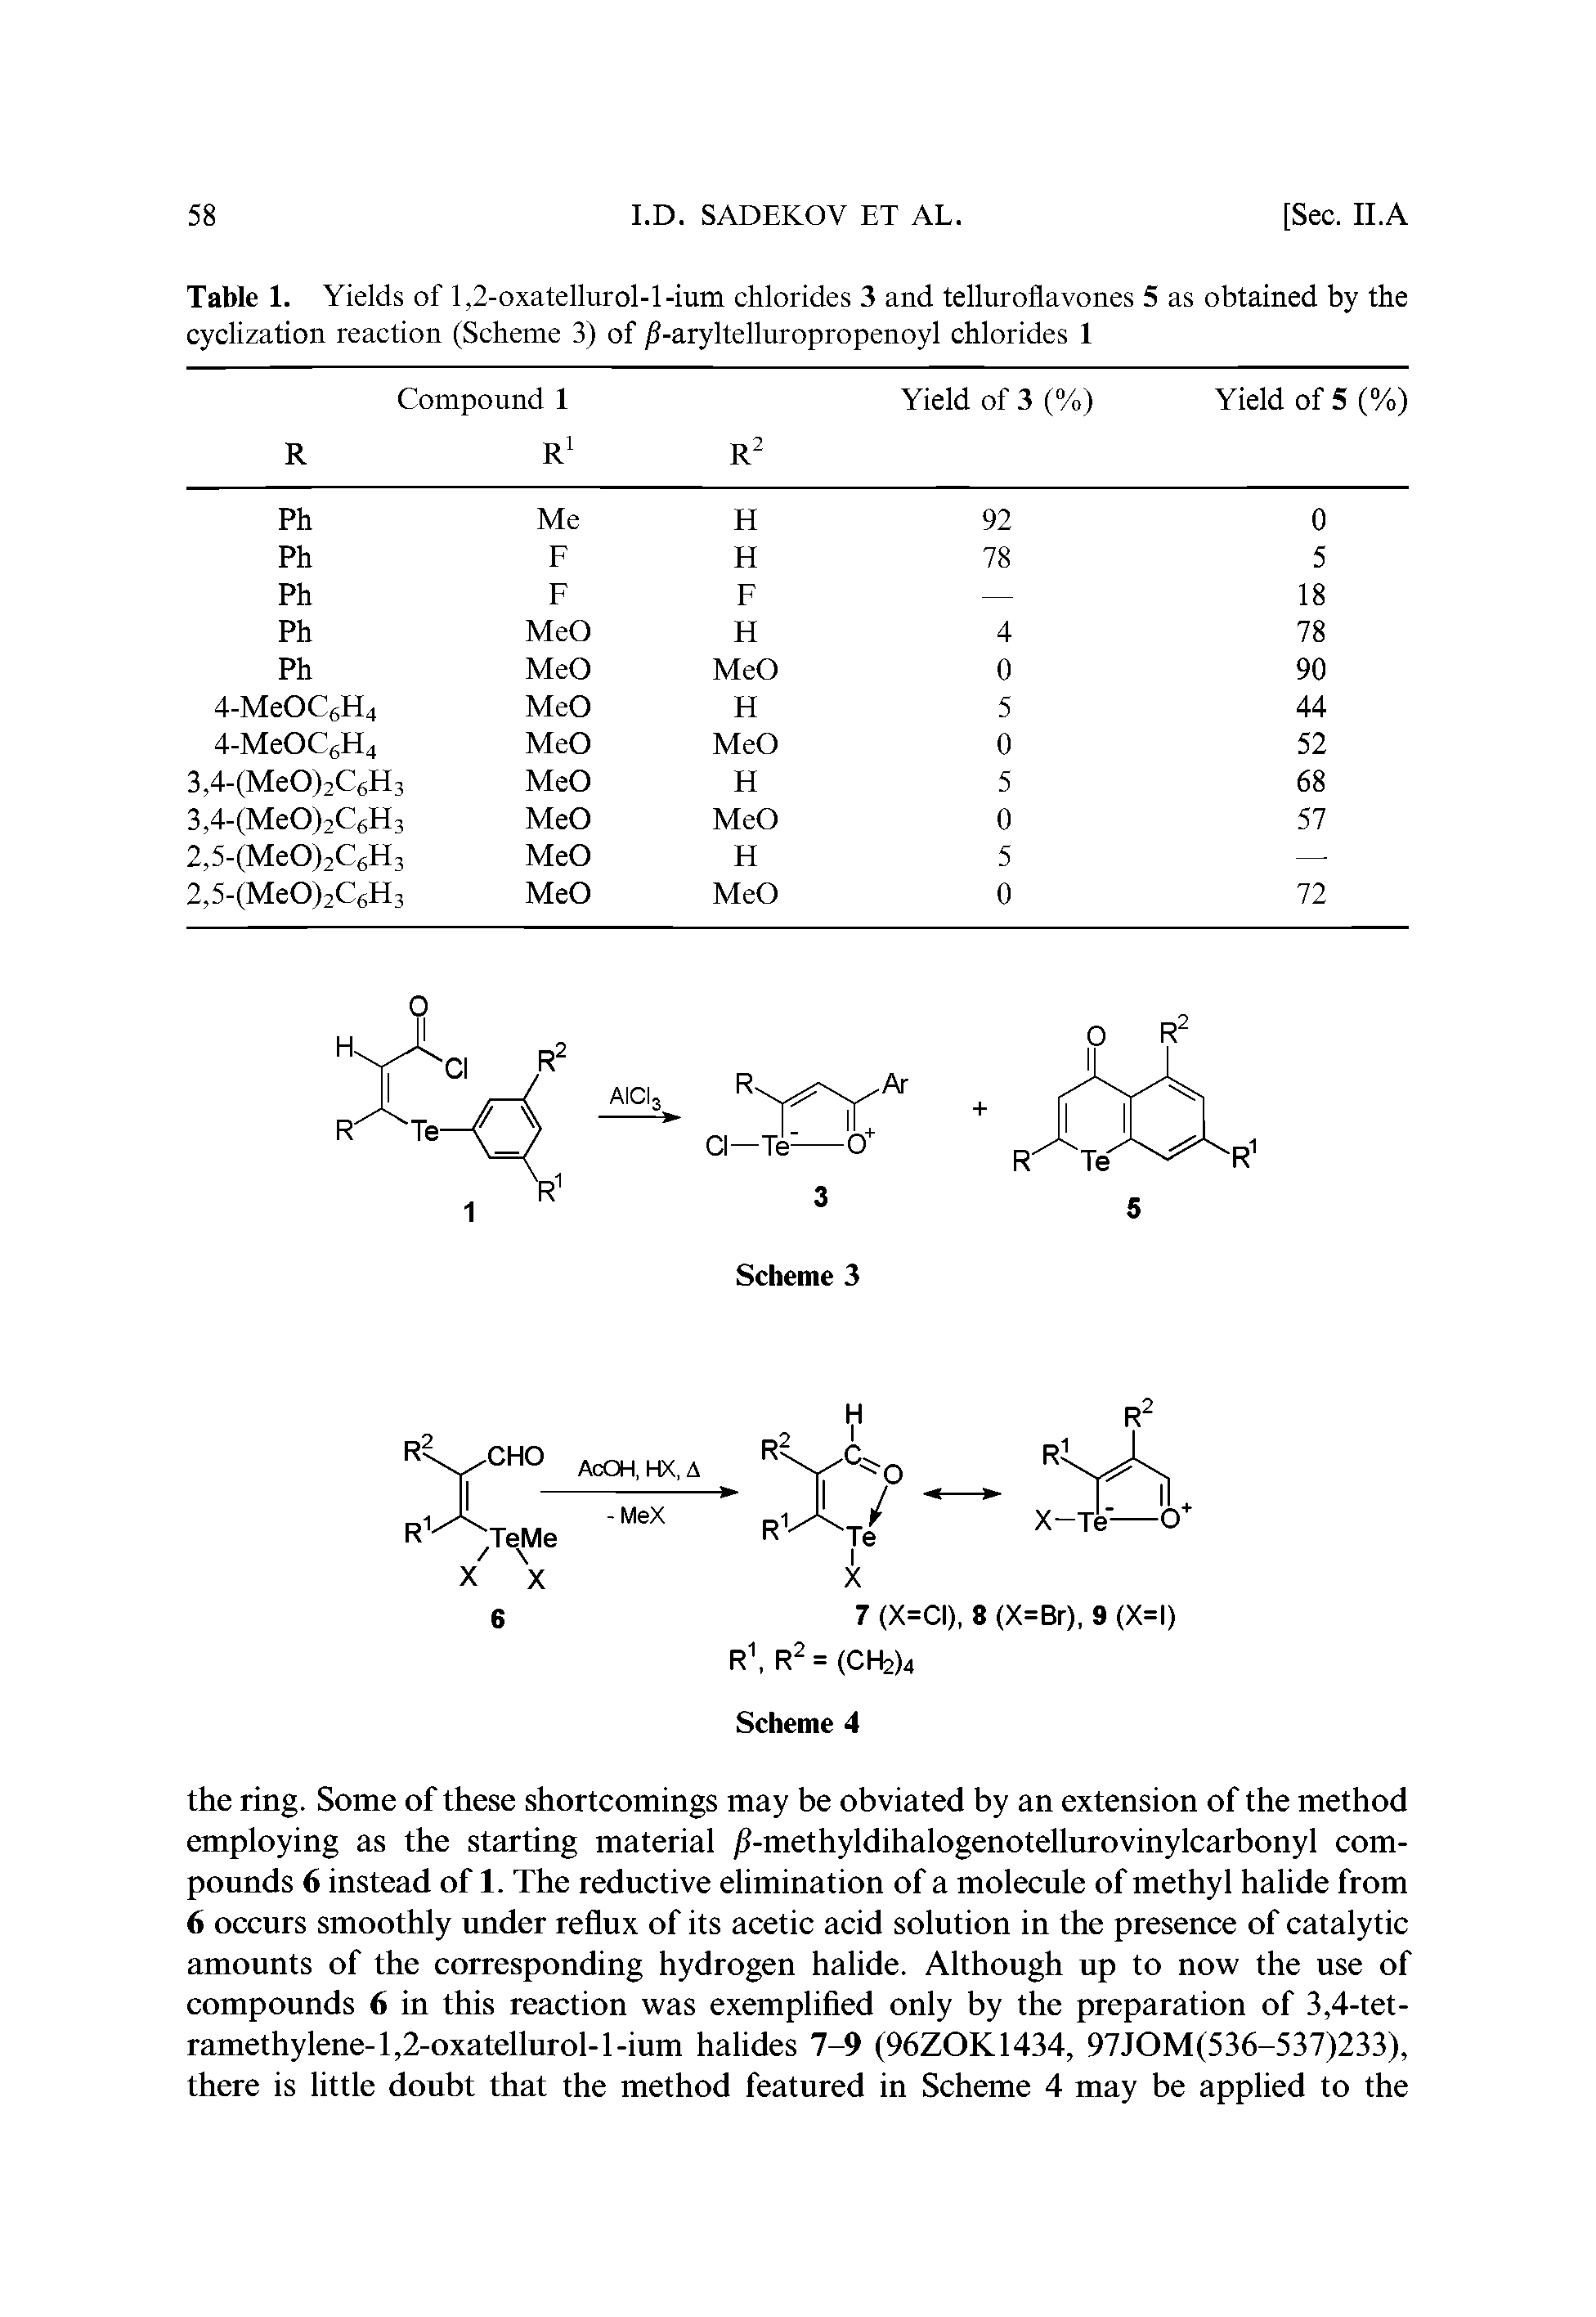 Table 1. Yields of 1,2-oxatellurol-l-ium chlorides 3 and telluroflavones 5 as obtained by the cyclization reaction (Scheme 3) of / -aryltelluropropenoyl chlorides 1...